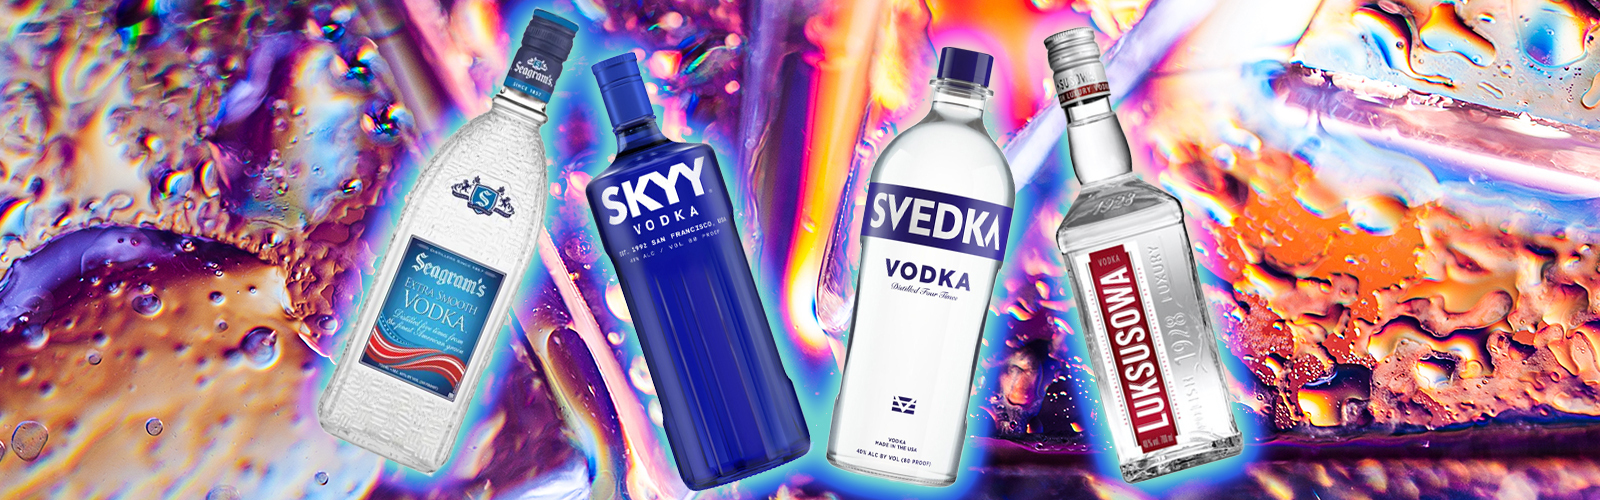 Cheap We Which To Rules? $20 Bottles A Vodka Put Test Blind